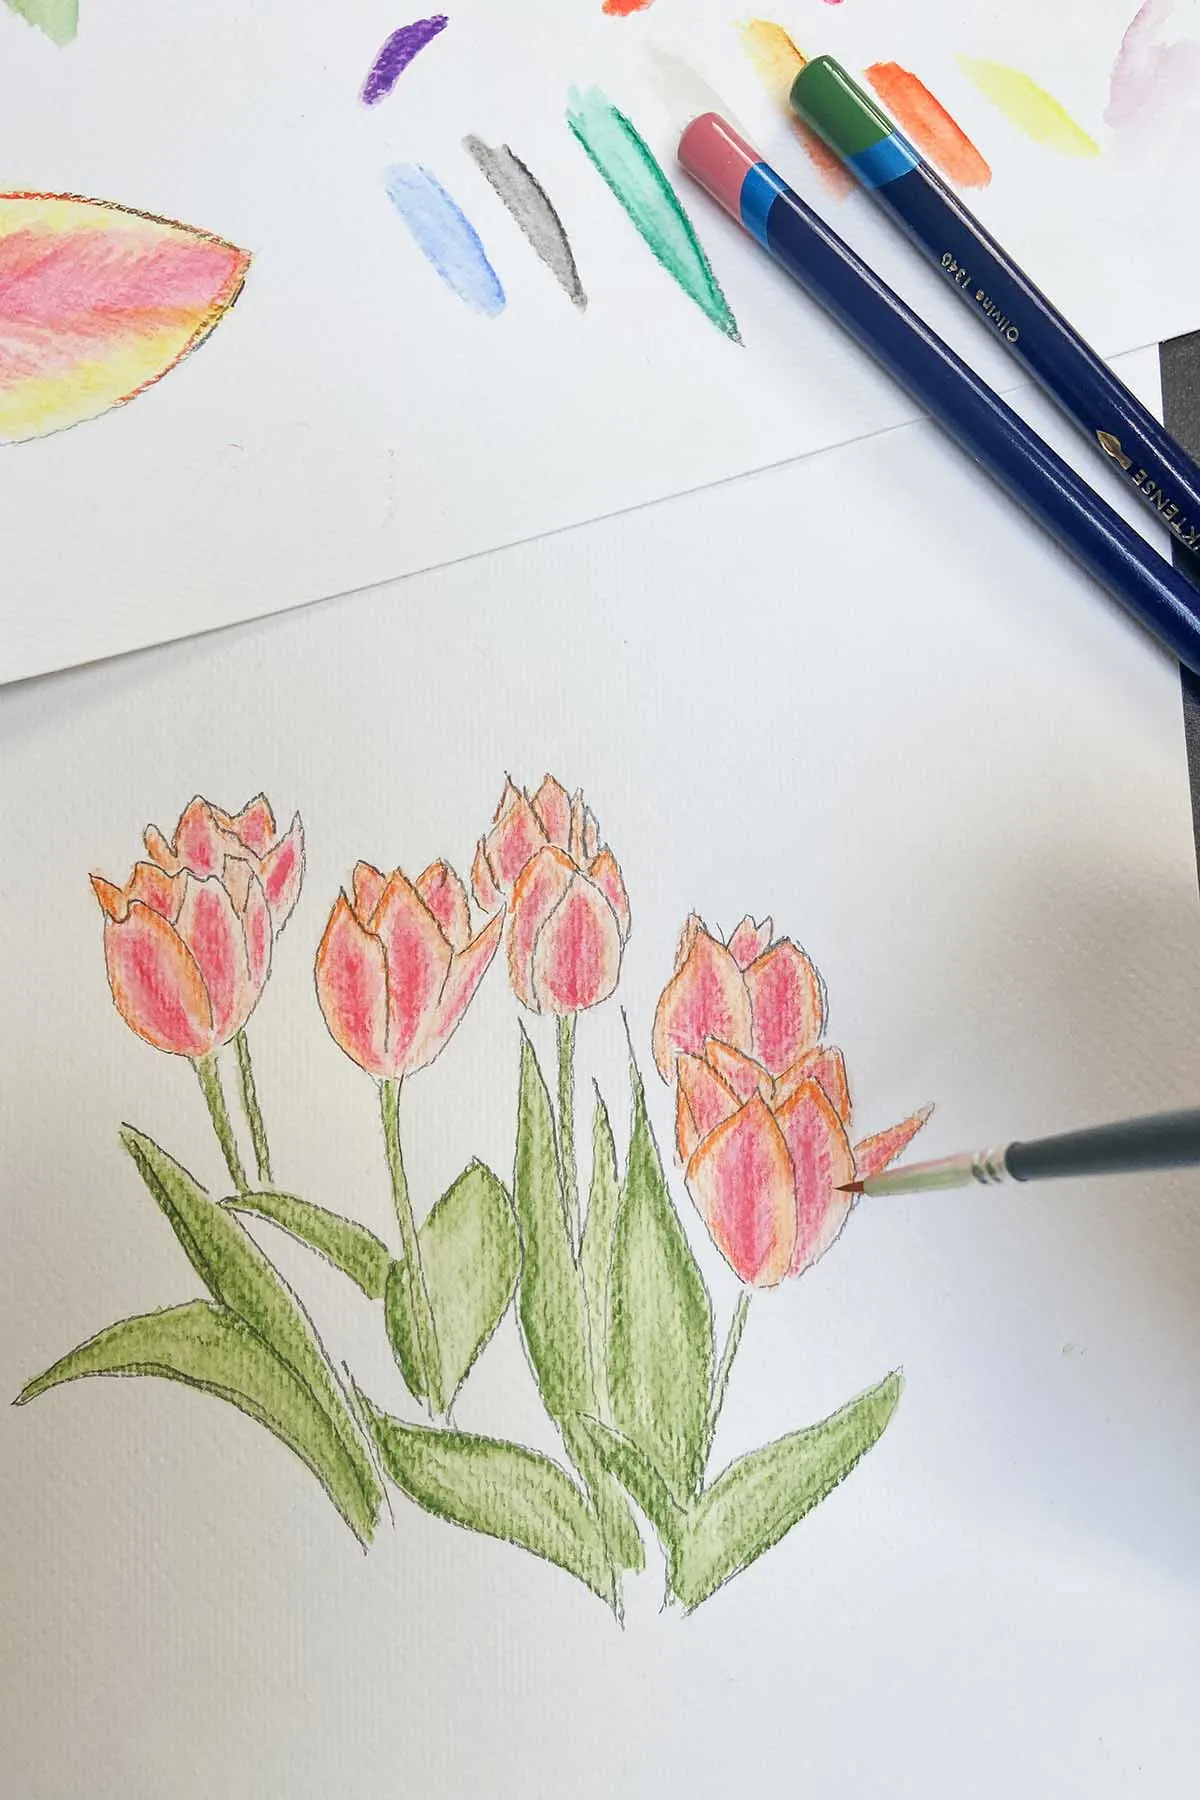 blending watercolour pencil on drawing of tulips